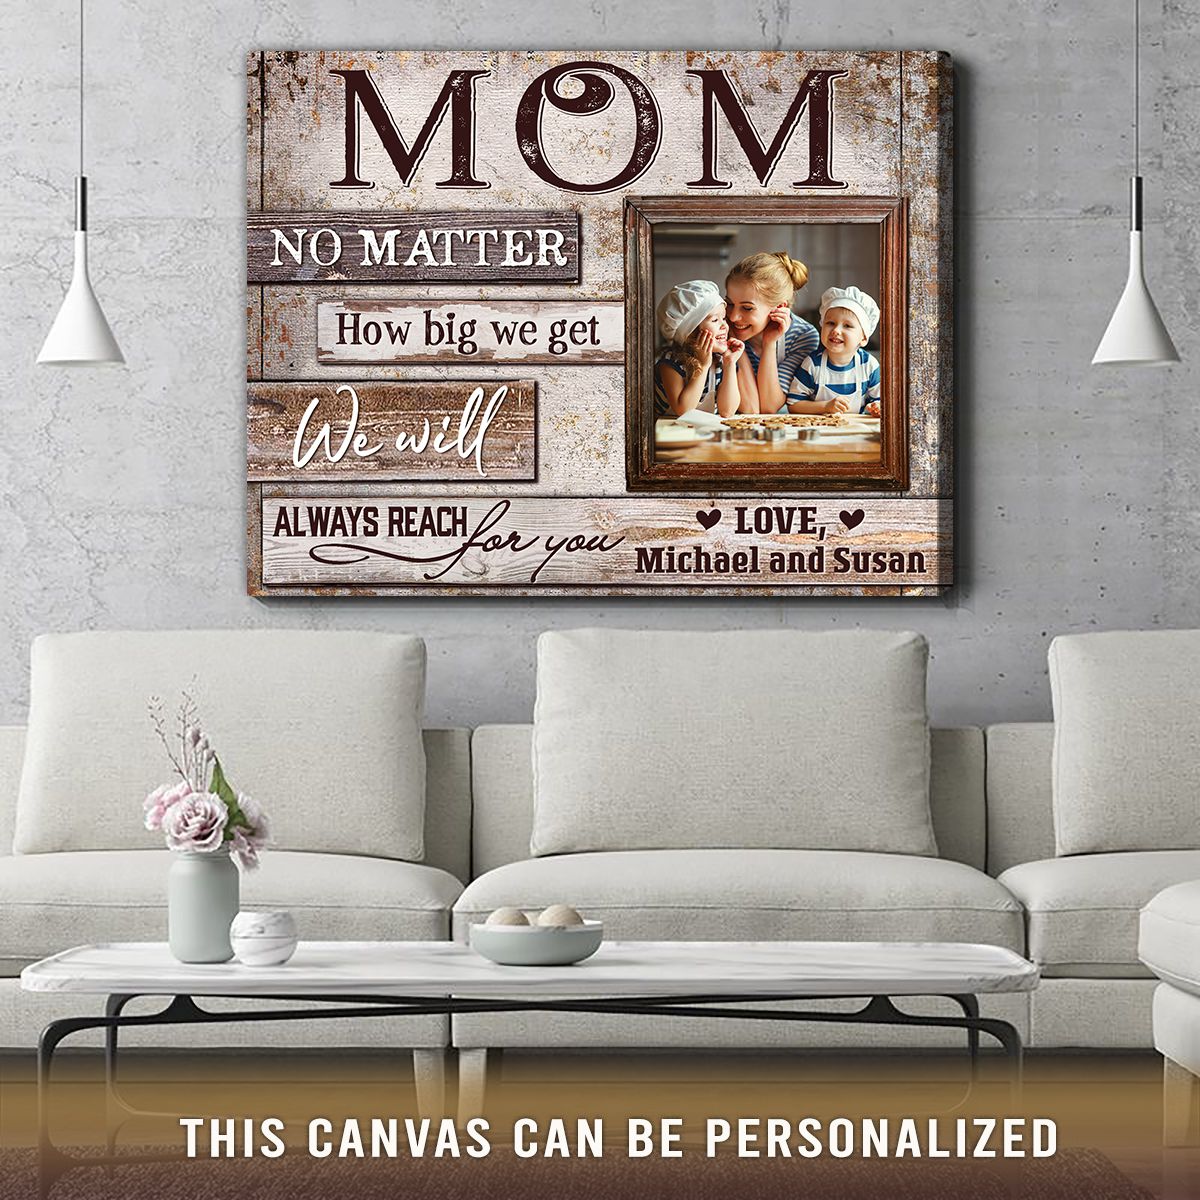  Personalized Gifts for Mom - Mother's Day Birthday